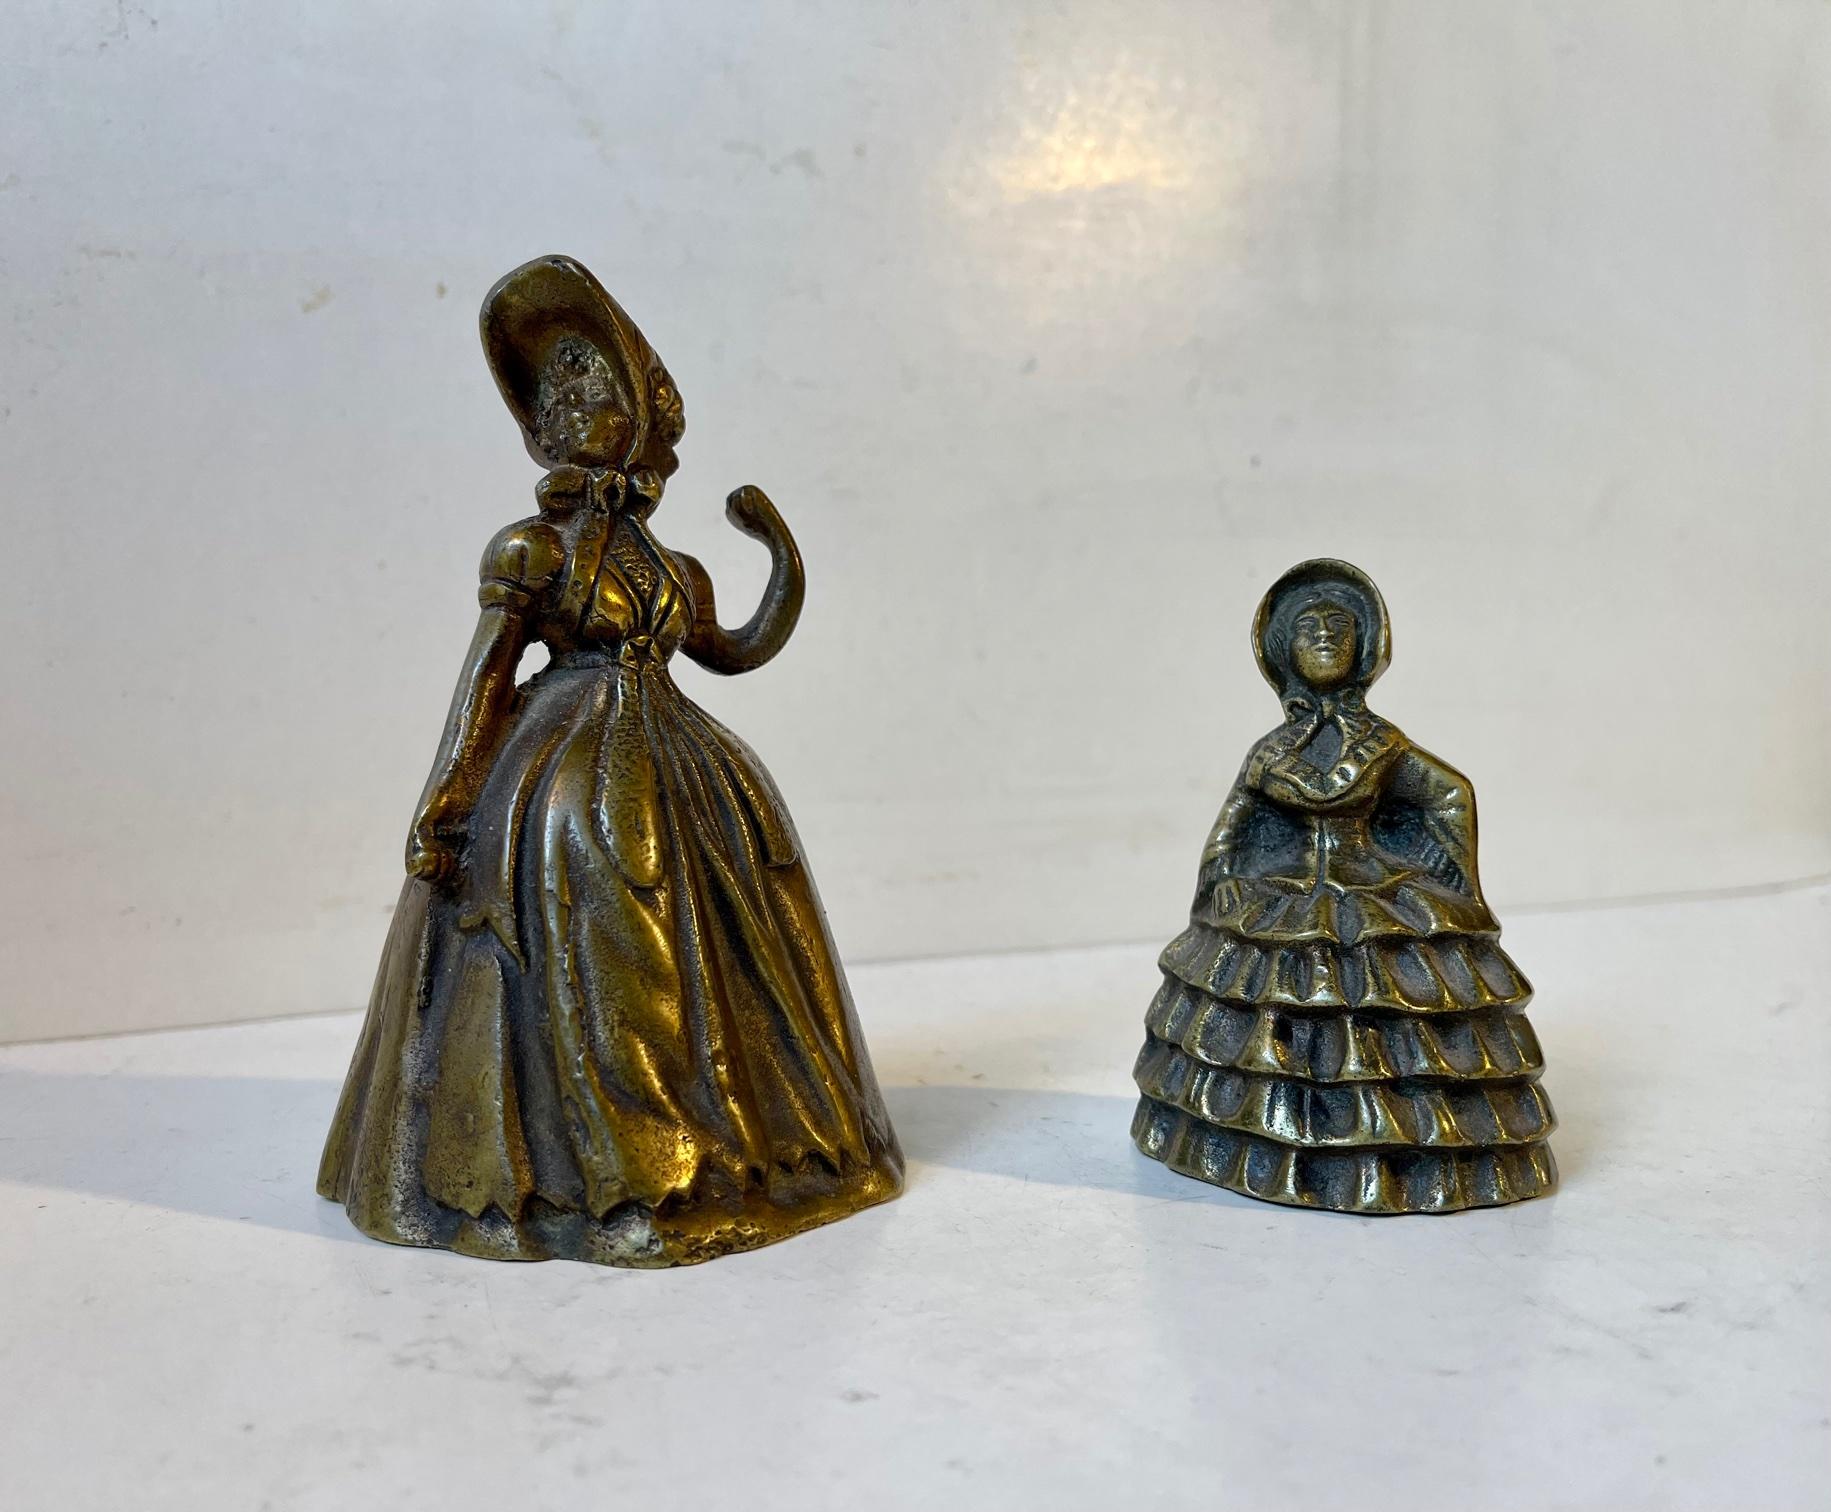 A couple of cast table bells in the shape of fashionable ladies. The little one showcases a Crinoline dress. They were both made in England during the 1860s. Despite their size of 12.5 and 8.5 cm they are rather heavy made from thich stocks brass.